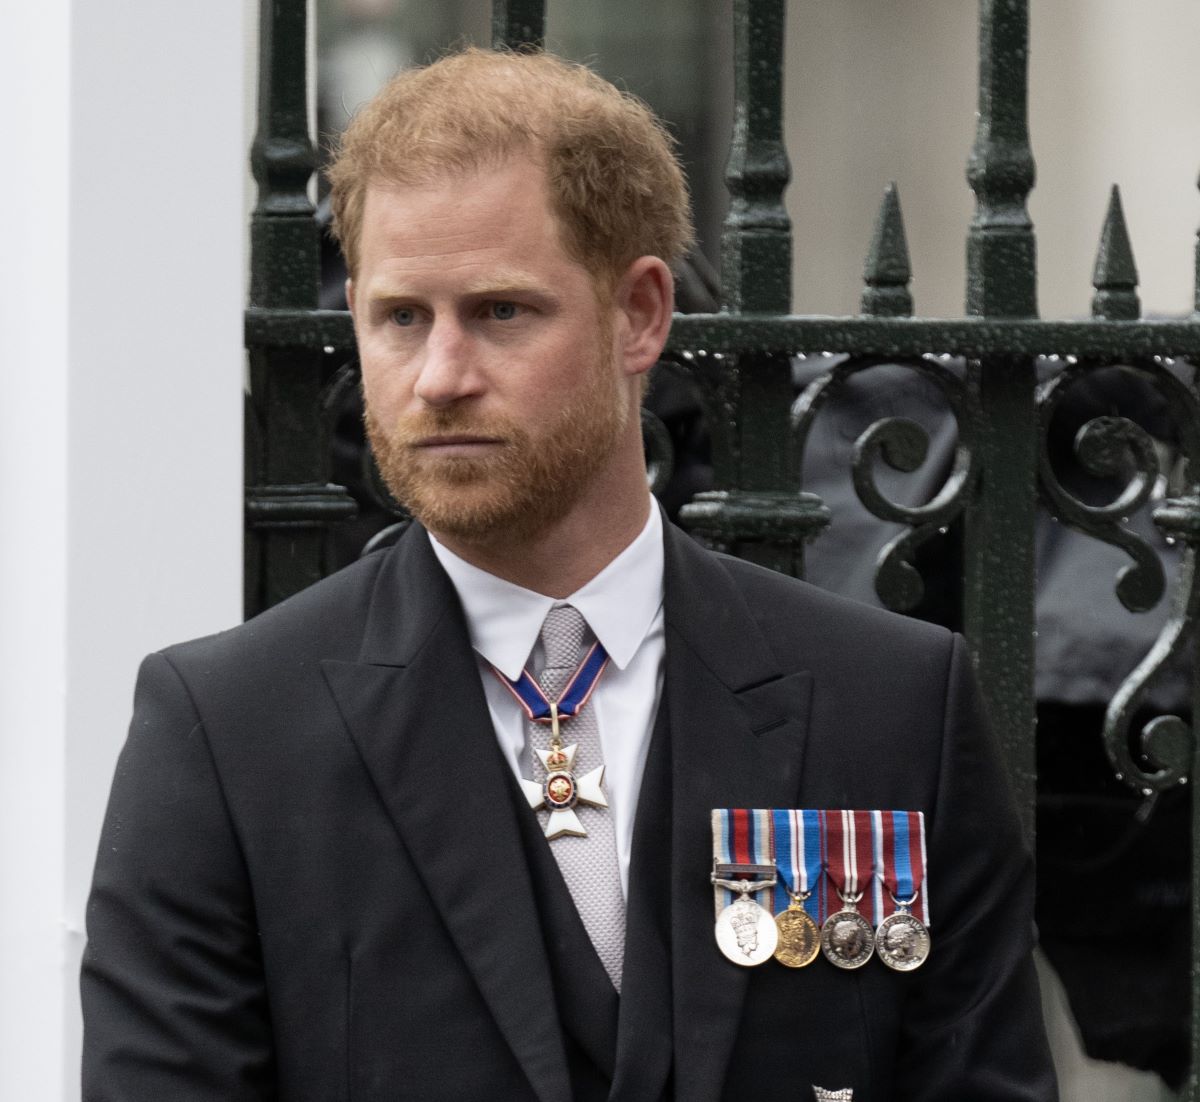 Prince Harry attends the Coronation of King Charles III and Queen Camilla at Westminster Abbey